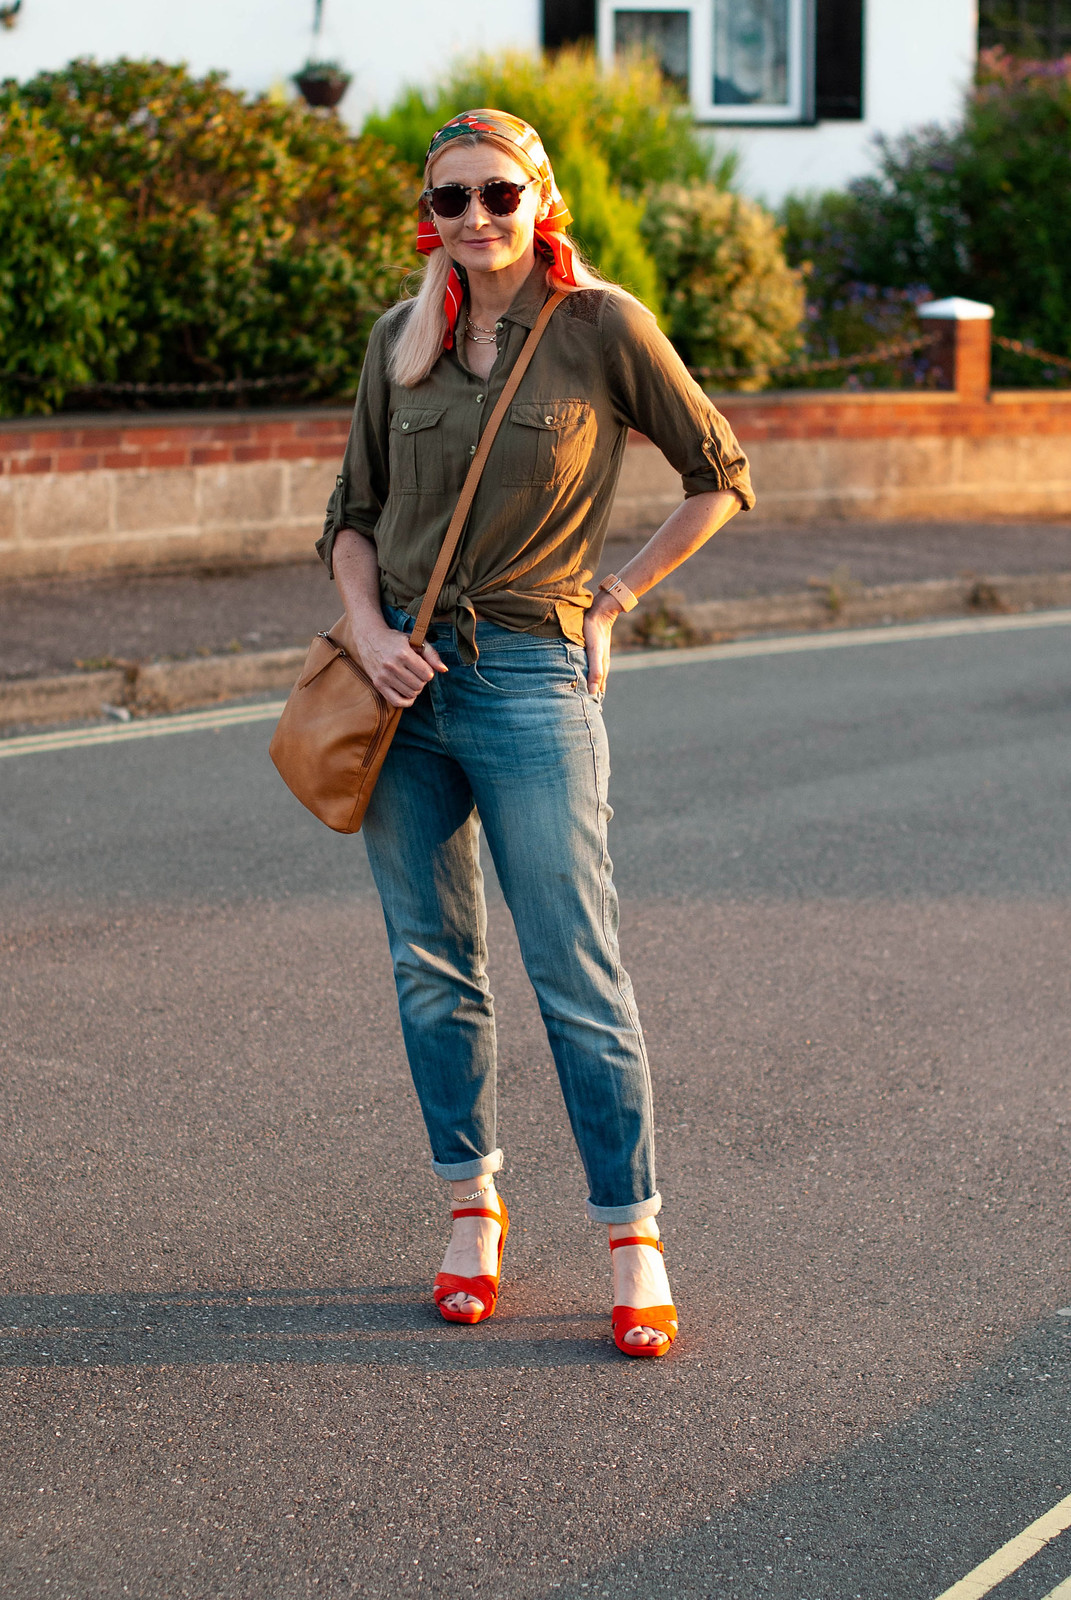 70s Head Scarves and Boyfriend Jeans Older Than Millie Bobby Brown | Not Dressed As Lamb, over 40 style (Catherine is wearing a green and orange patterned headscarf, a loose olive green shirt, boyfriend jeans and strappy orange sandals in a street-style photo)